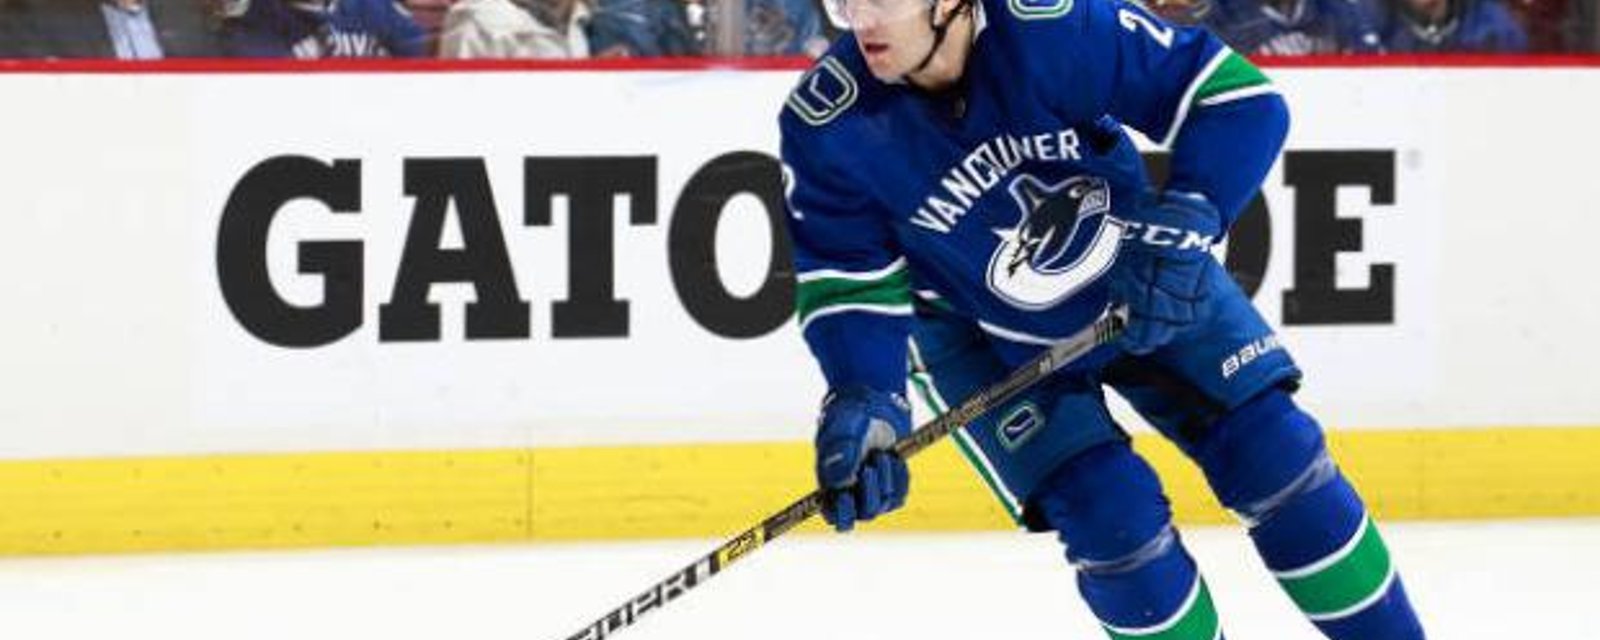 Schenn turned down offer from Canucks before leaving for Tampa